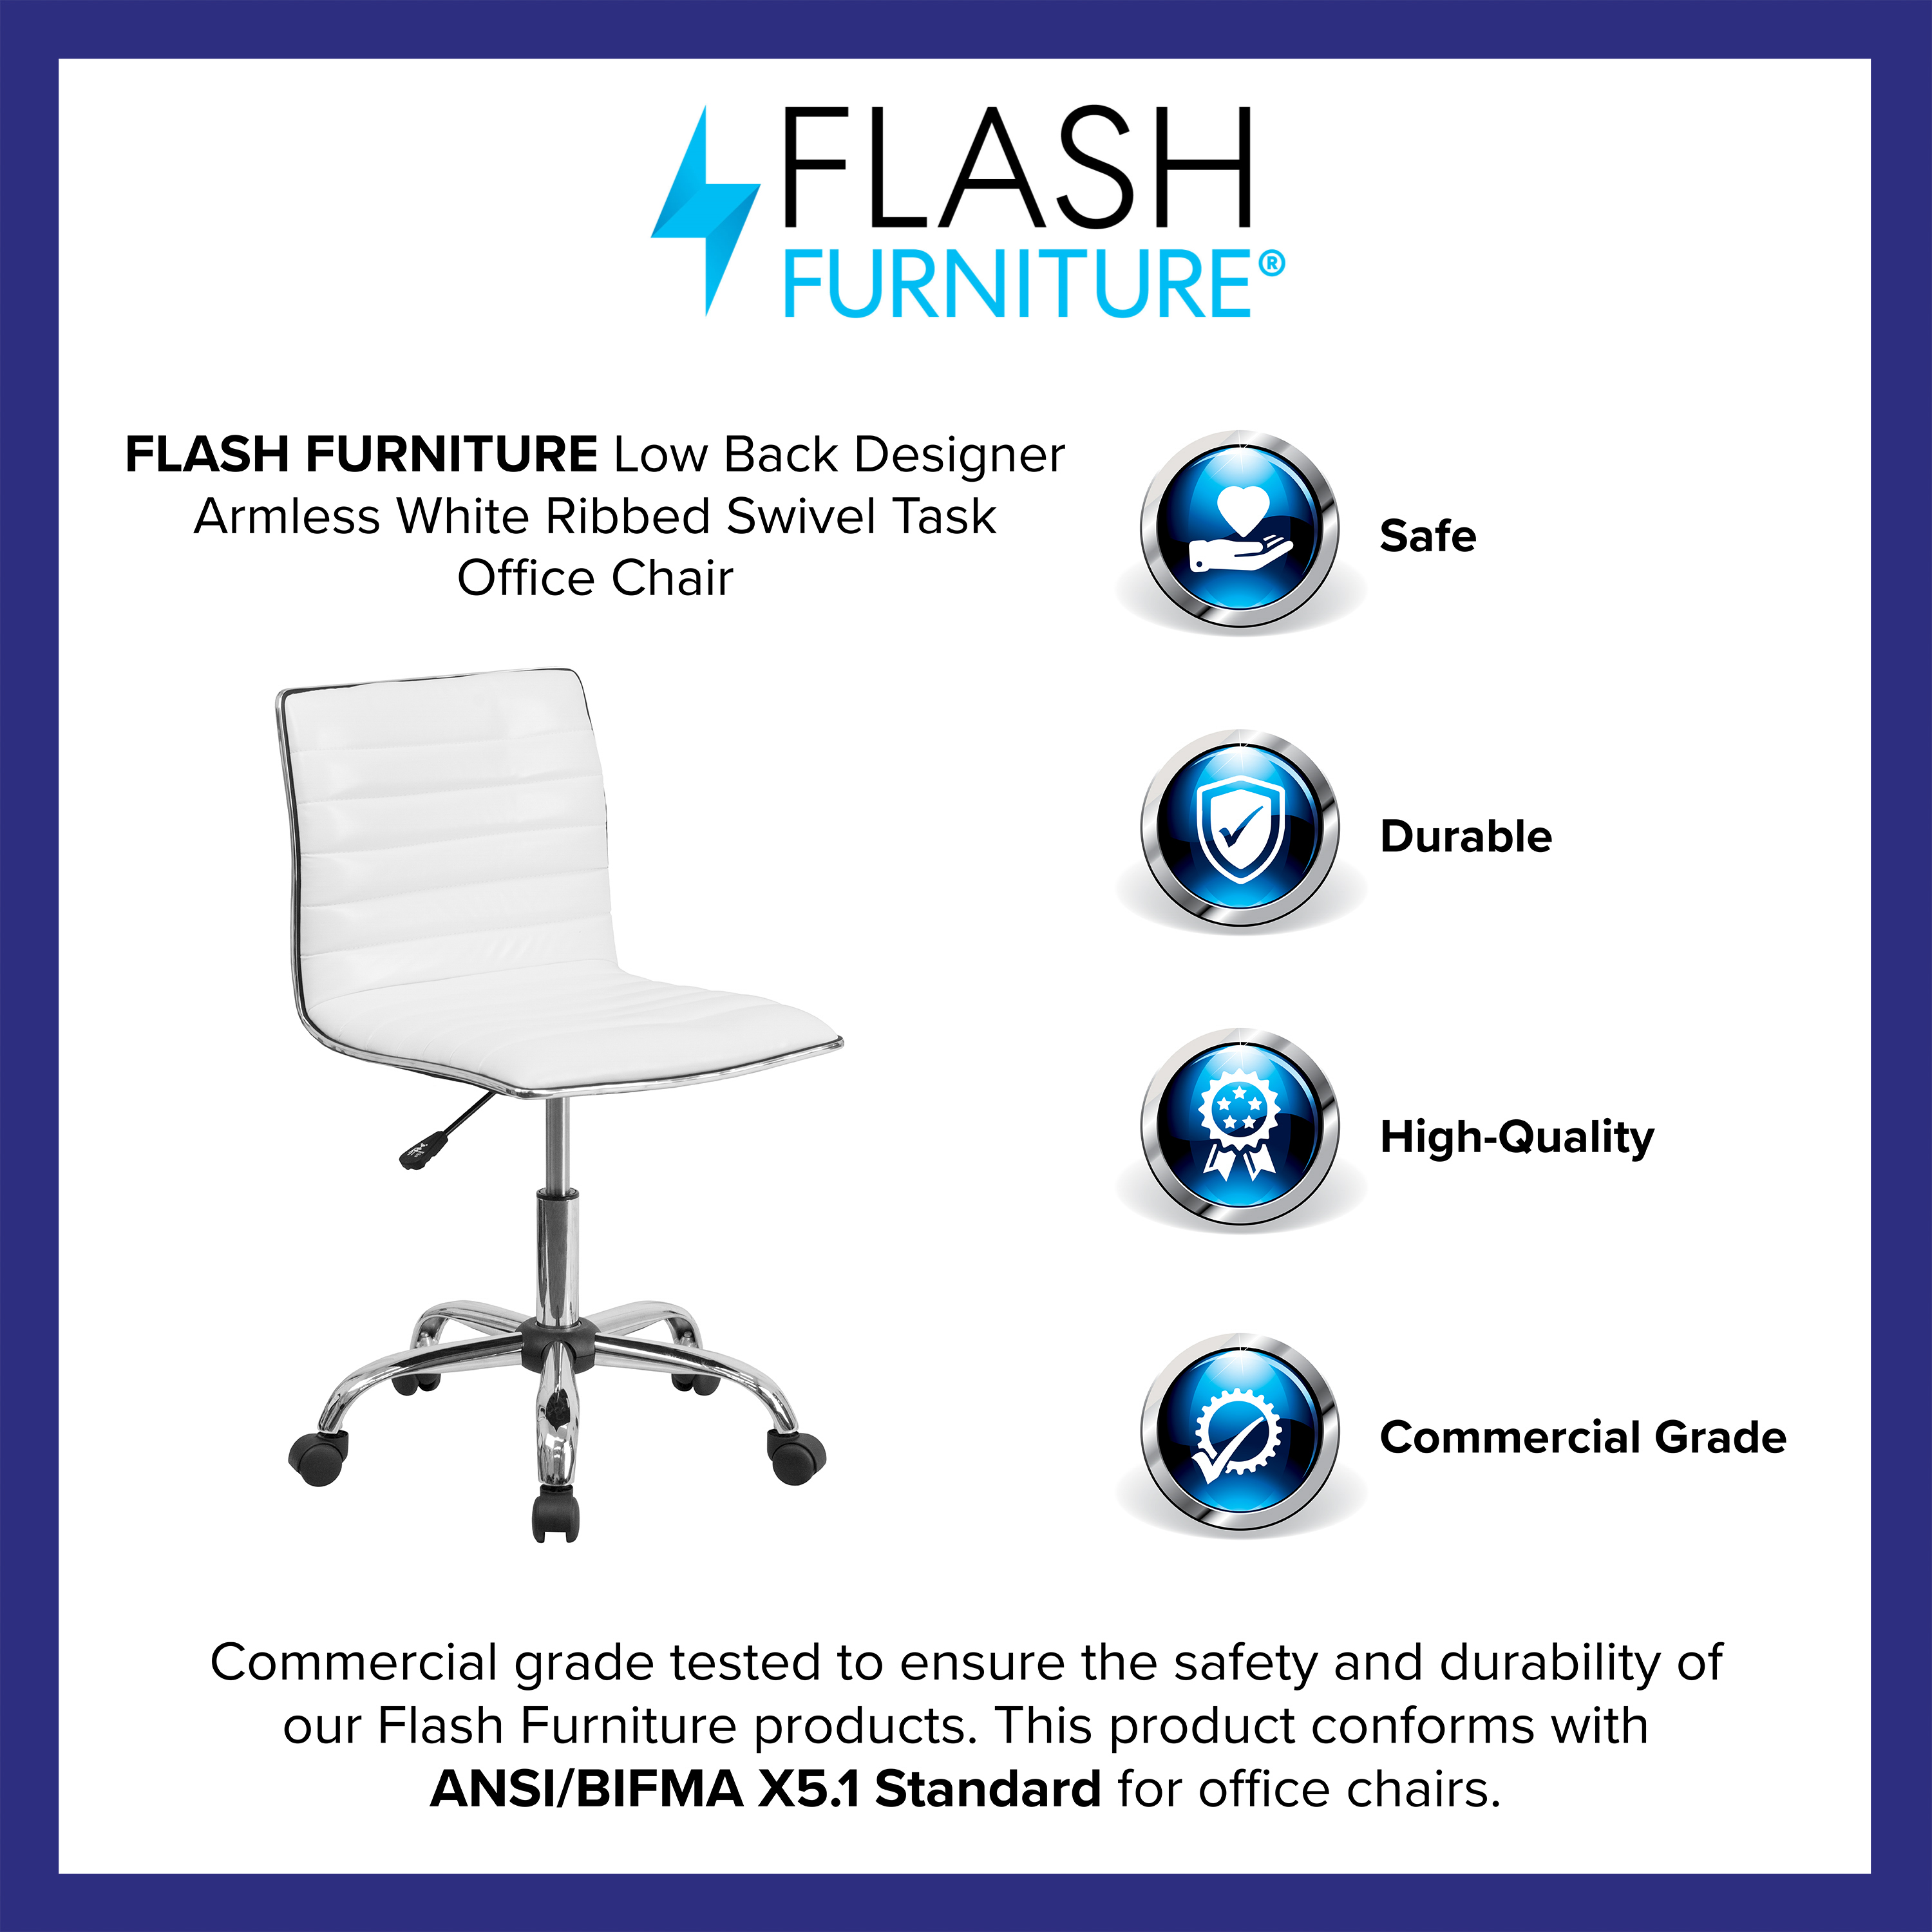 Flash Furniture Low Back Designer Armless White Ribbed Swivel Task Office Chair - image 5 of 14